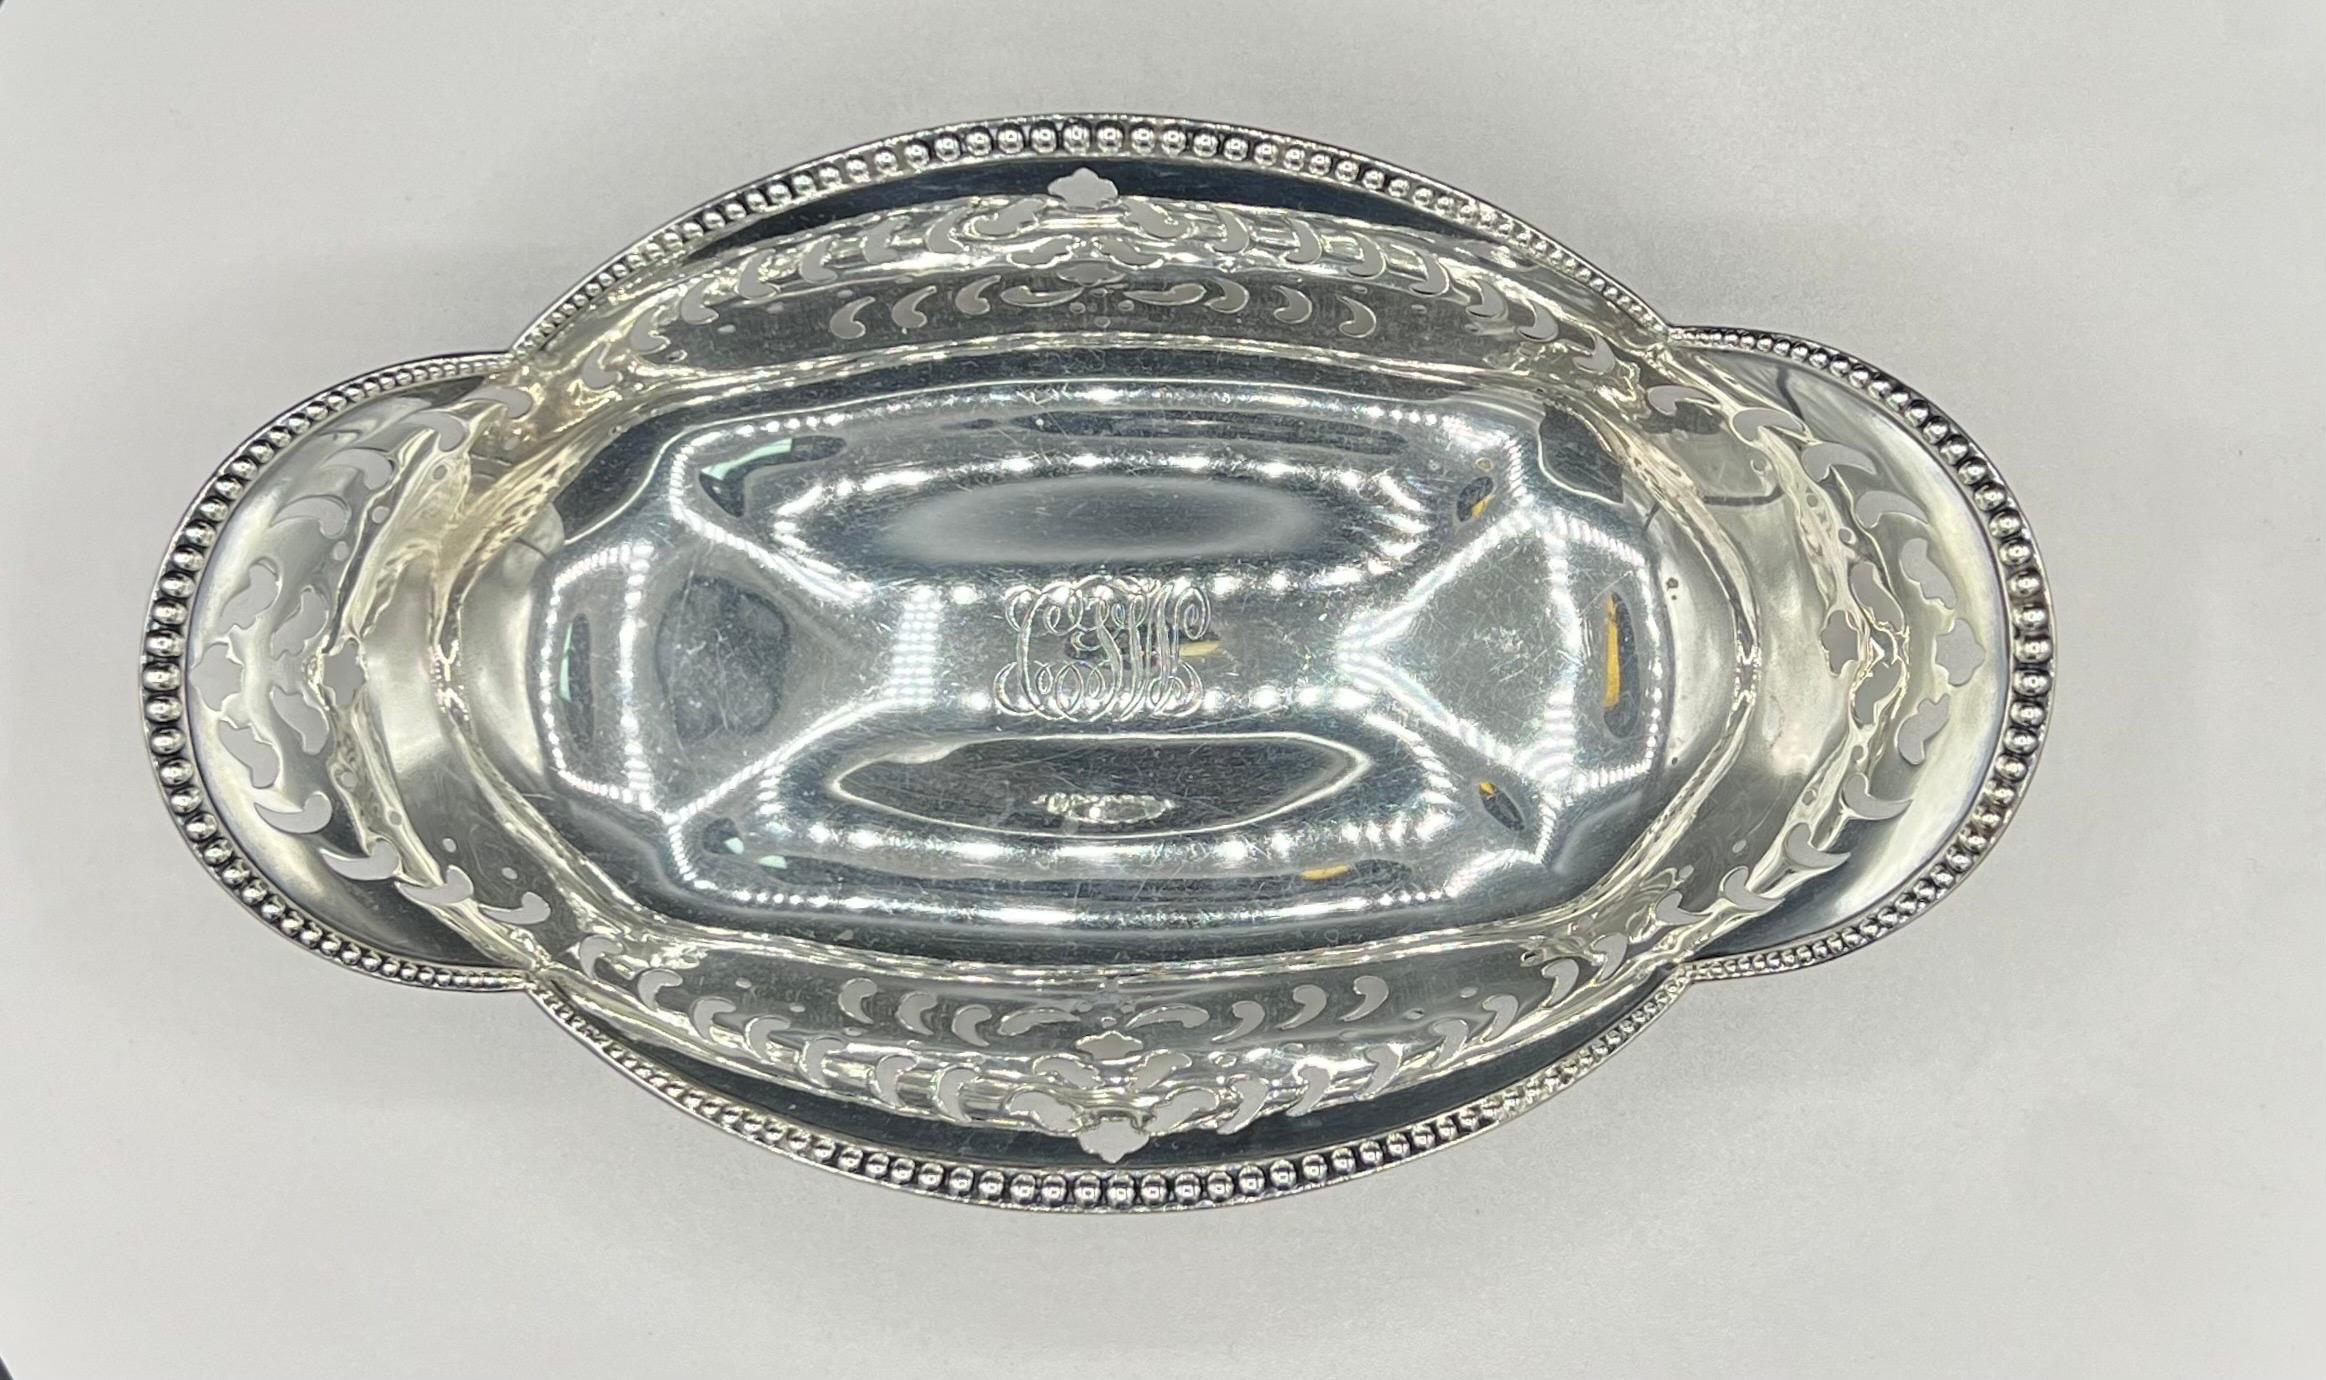 Tiffany & Co., sterling silver pierced condiment dish in pattern number 13835 from 1898. They measure 7 3/4'' in length by 4 7/8'' in width by 2'' in height and bear hallmarks as shown. Total weight is 7.6 troy ounces. 

The legendary Tiffany brand